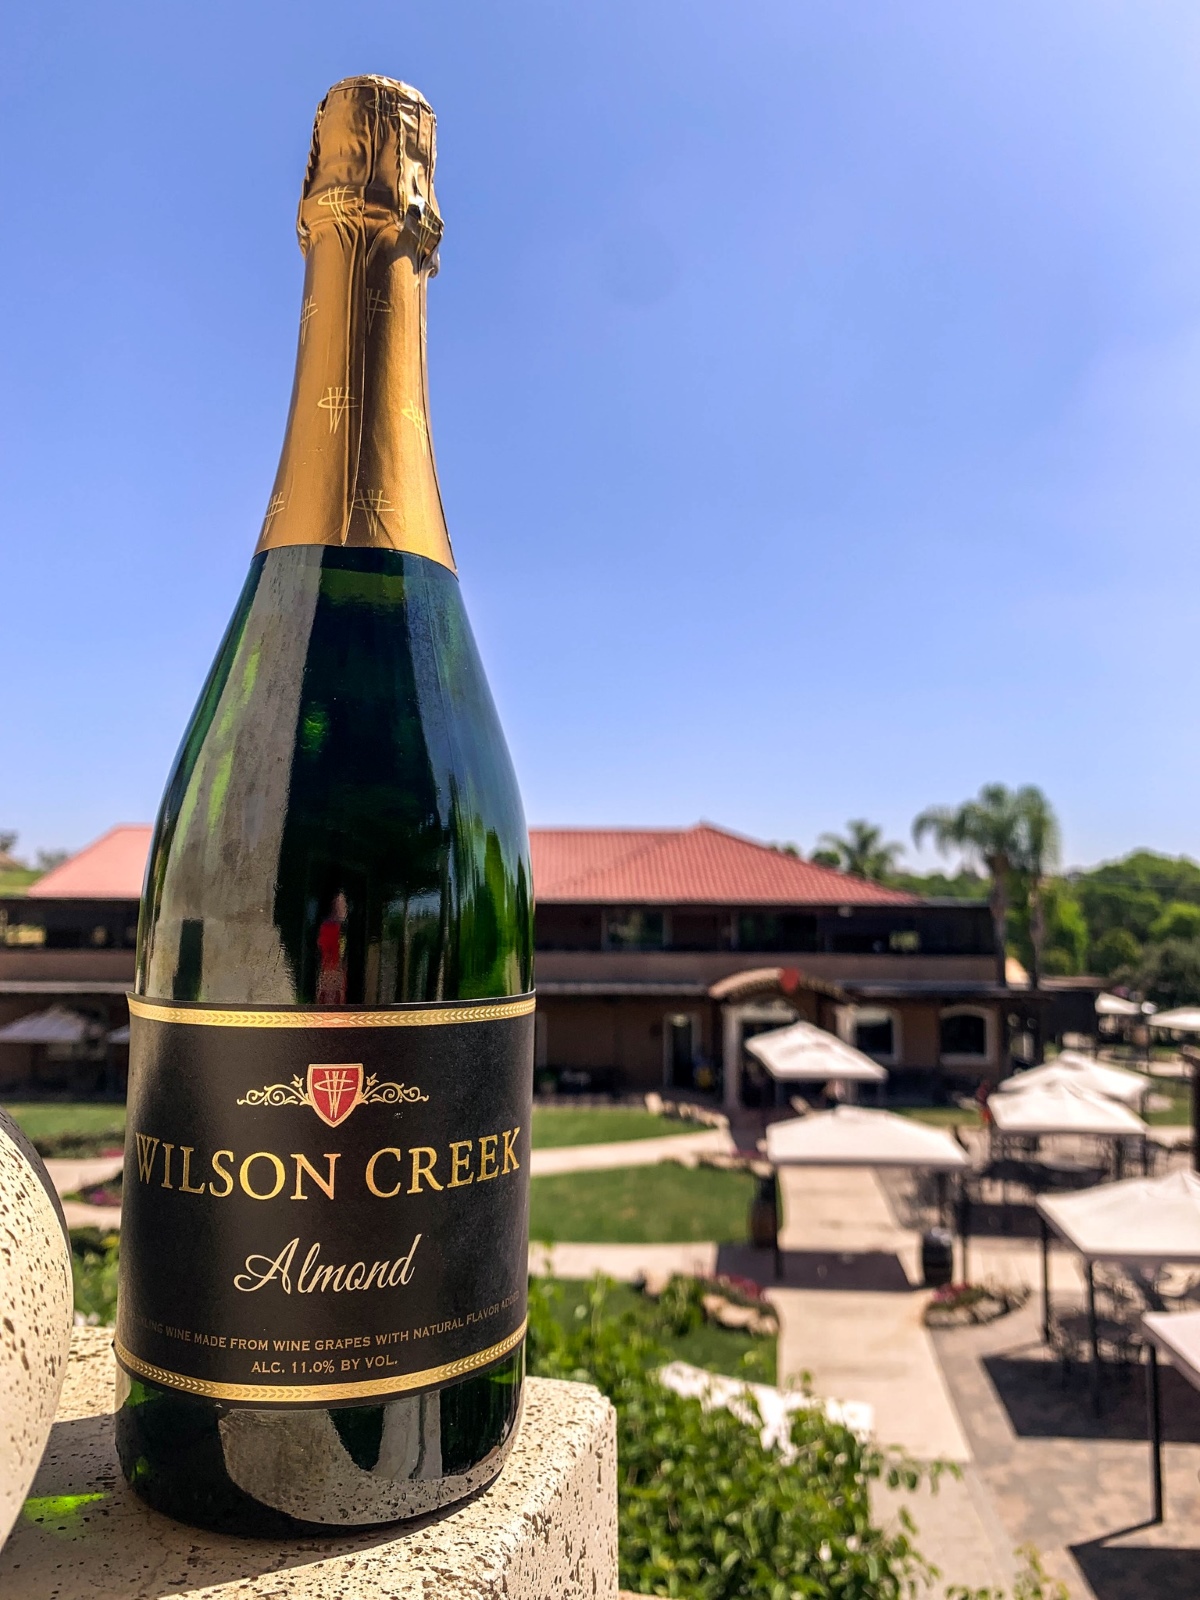 A bottle of Wilson Creek Winery's Almond Sparkling Wine sits on a ledge outside the winery in California.